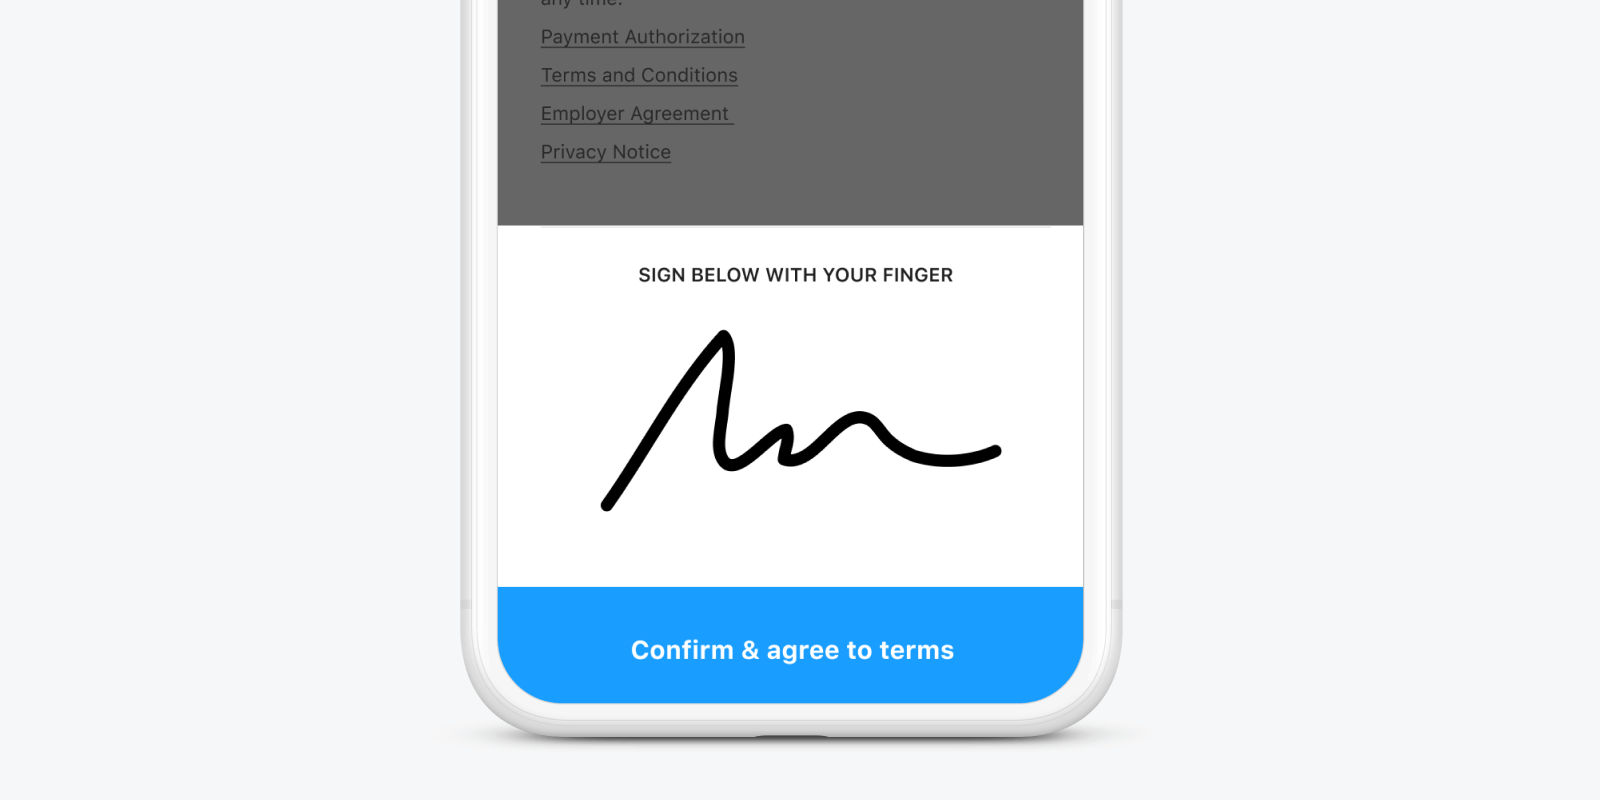 The Even app's signature screen, showing text that says "Sign below with your finger," a signature field, and a blue bar saying "Confirm & agree to terms".